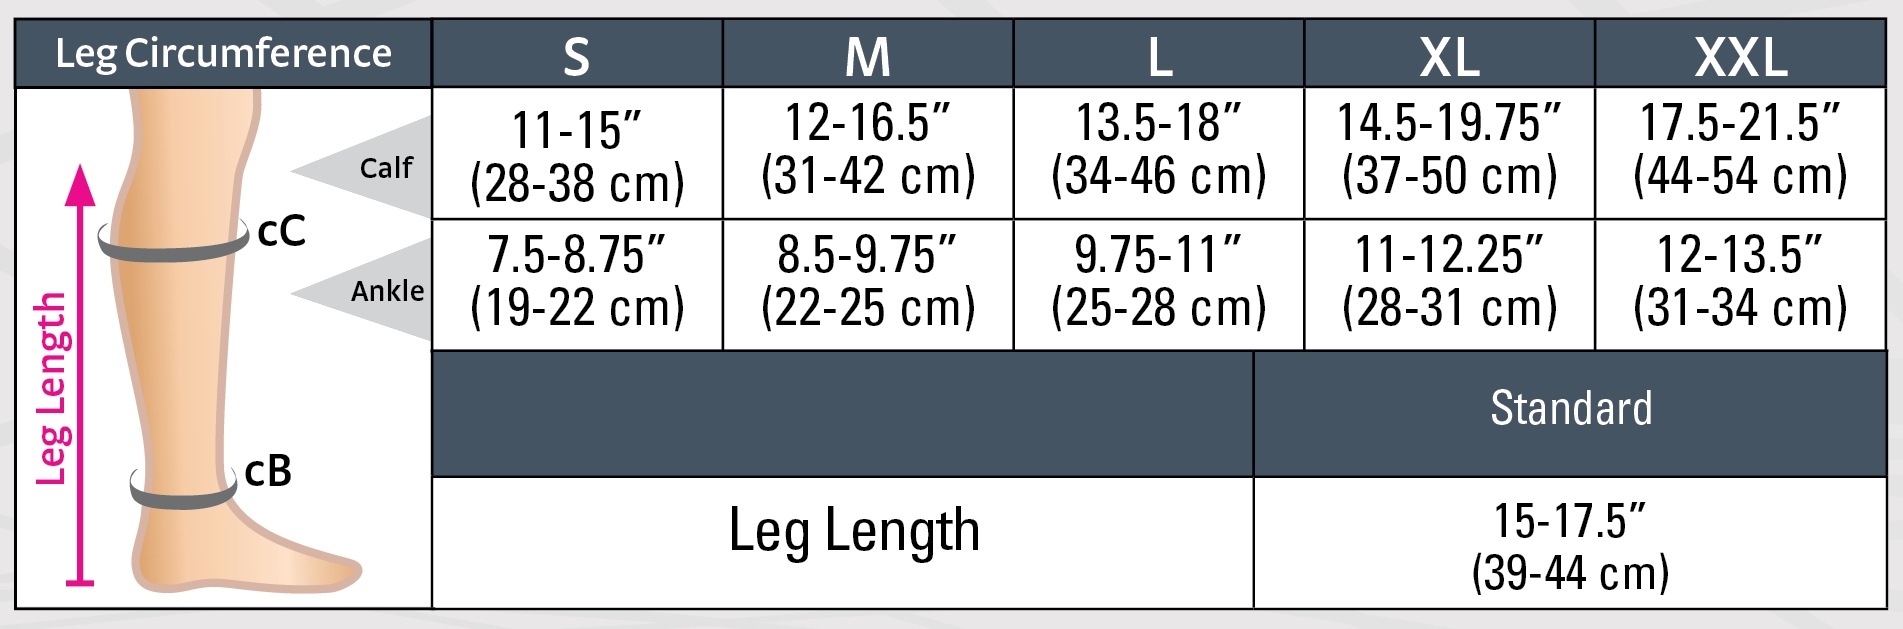 duomed patriot size chart